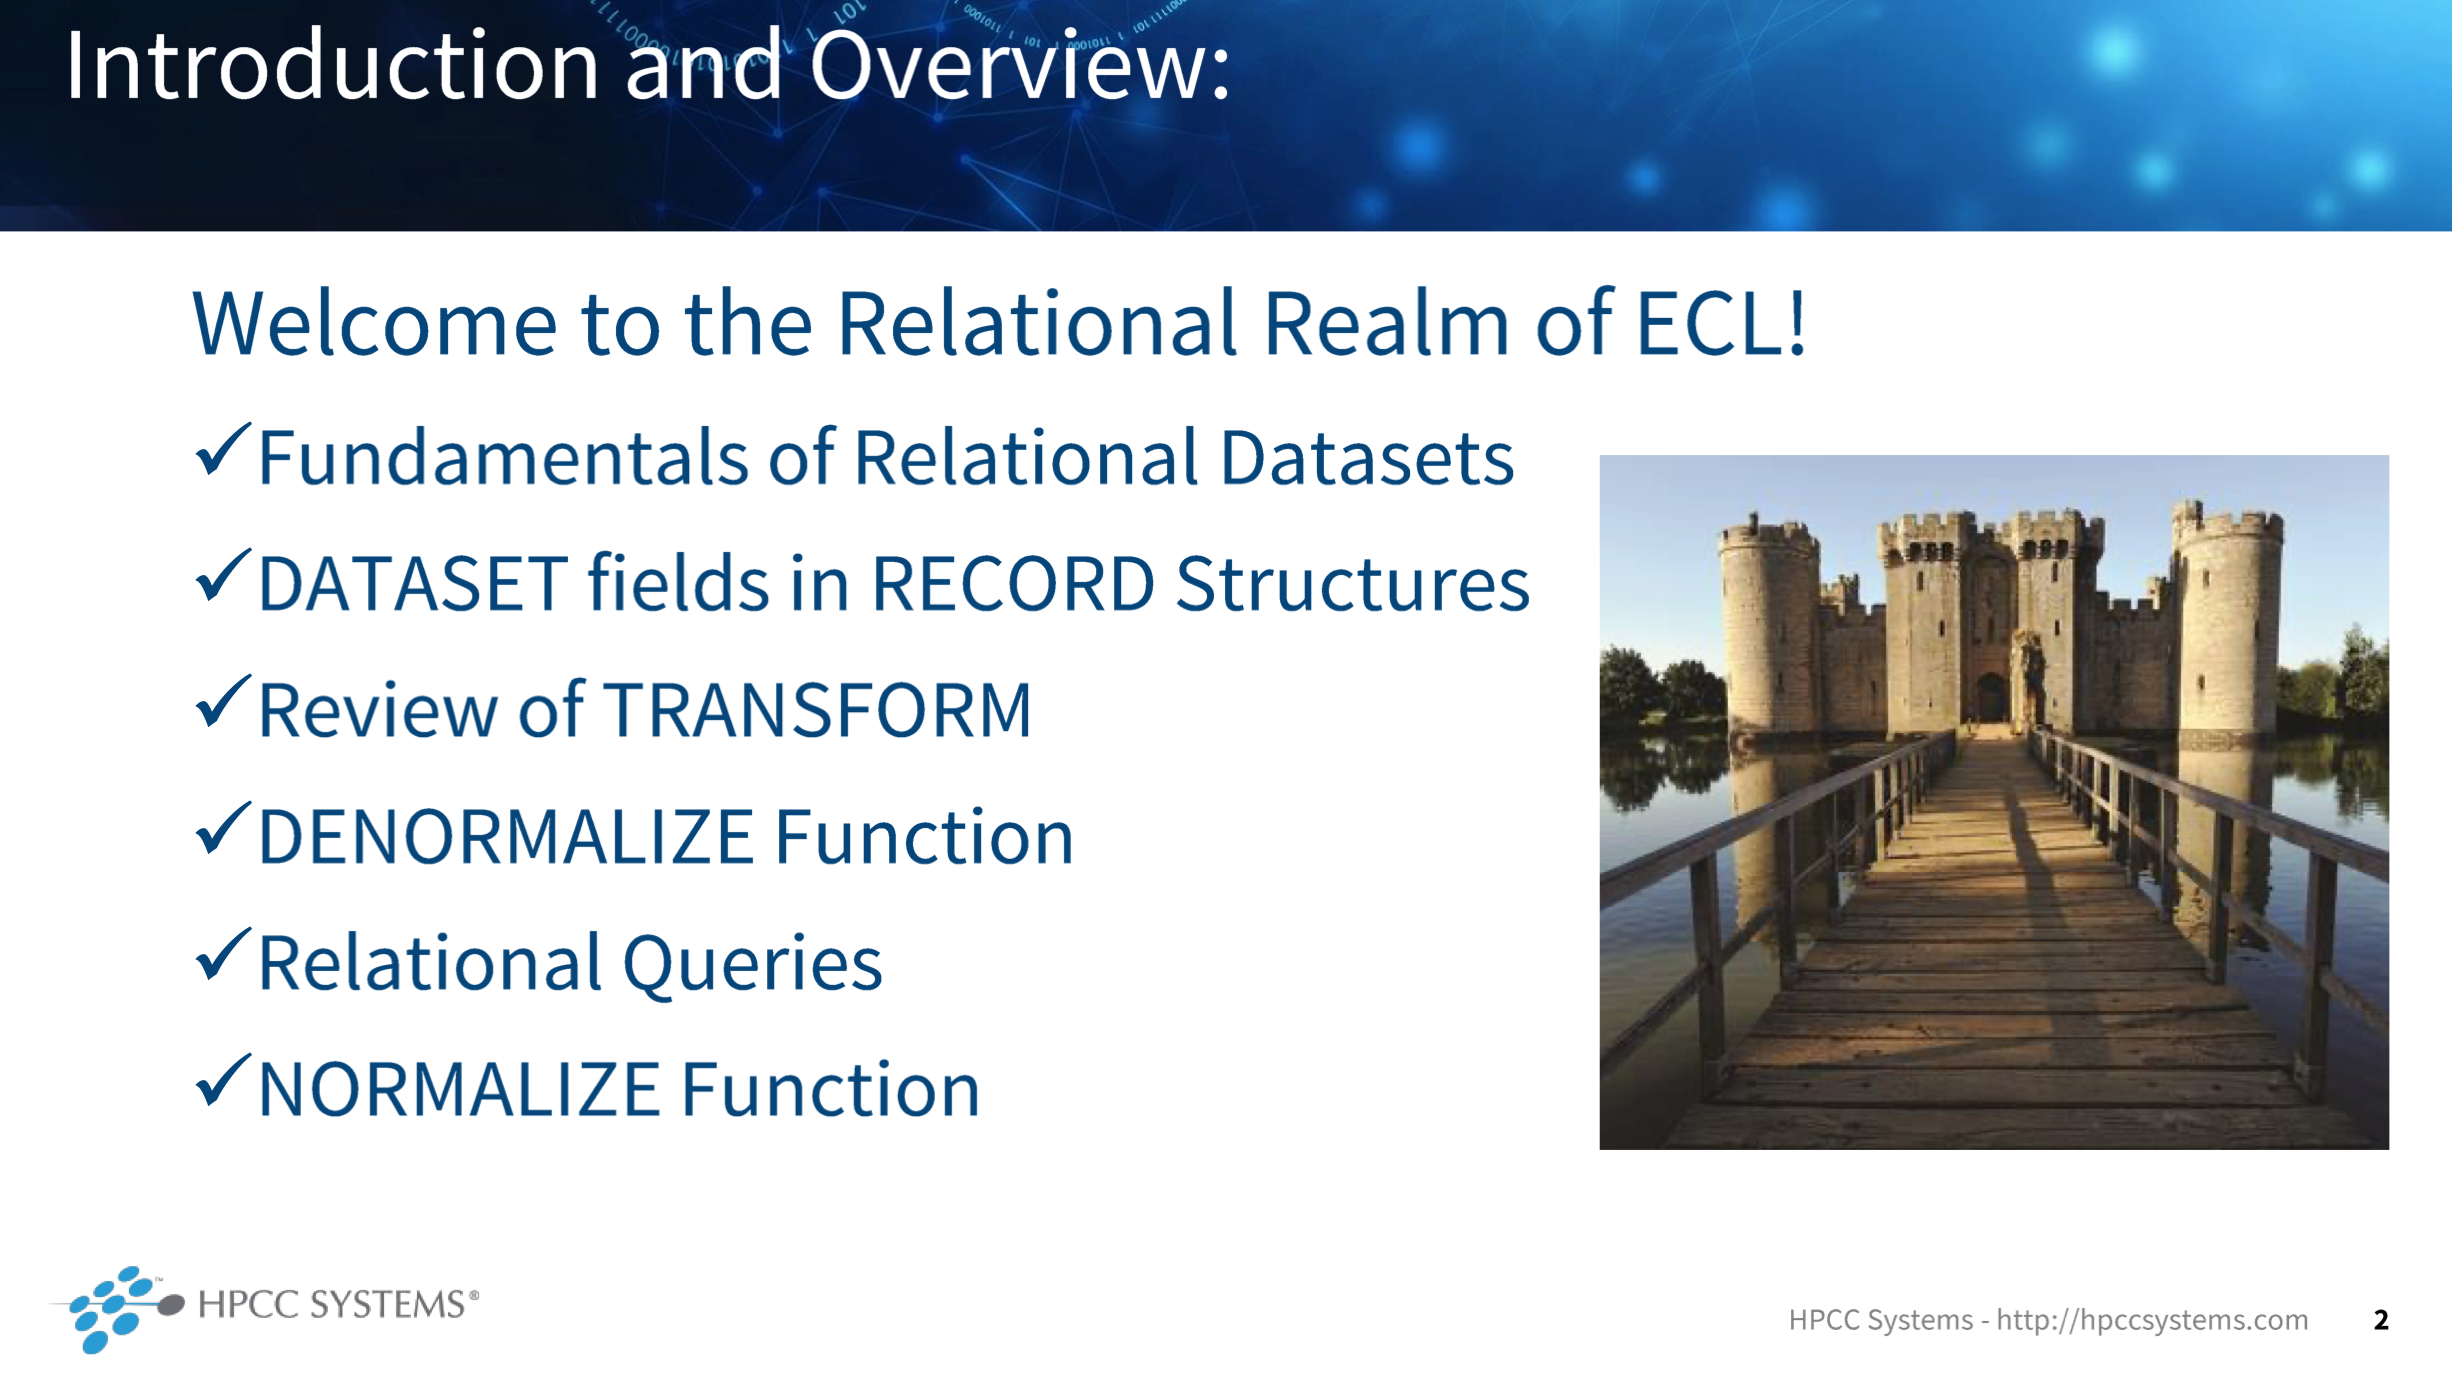 Image Showing the course outline for The Relational Realm